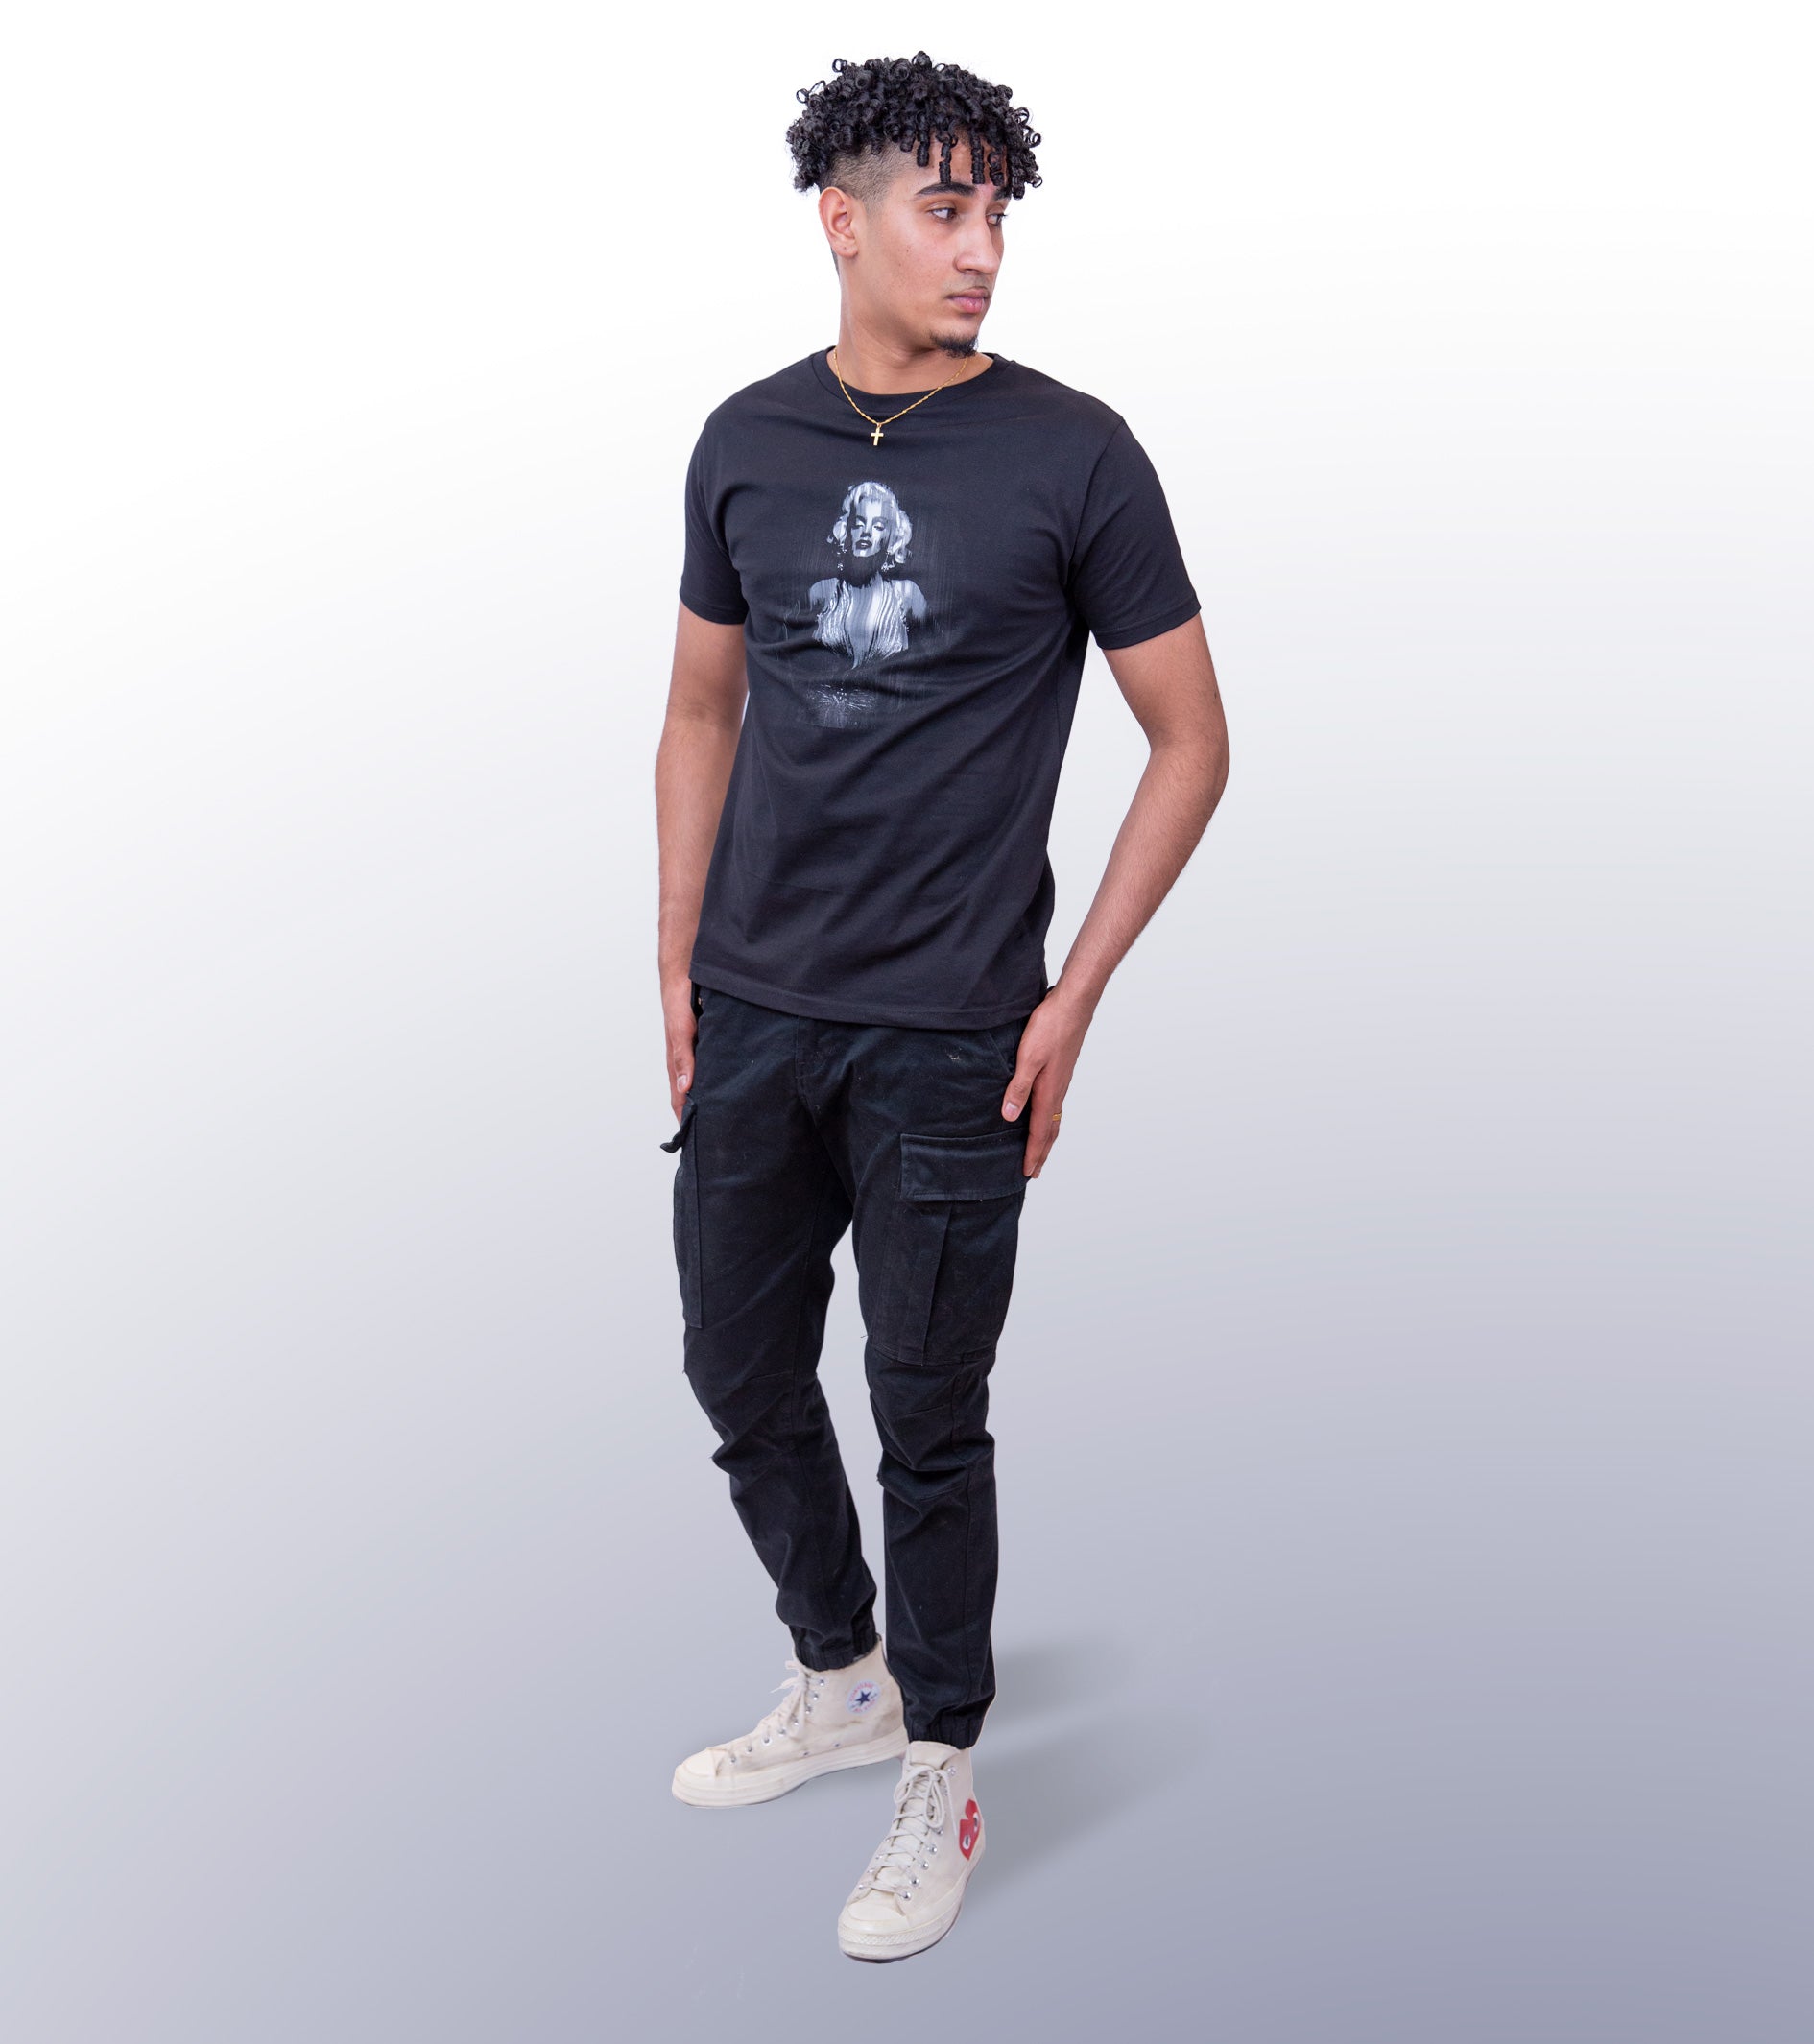 ICON ONE – FRONT PRINT – BLACK T-SHIRT